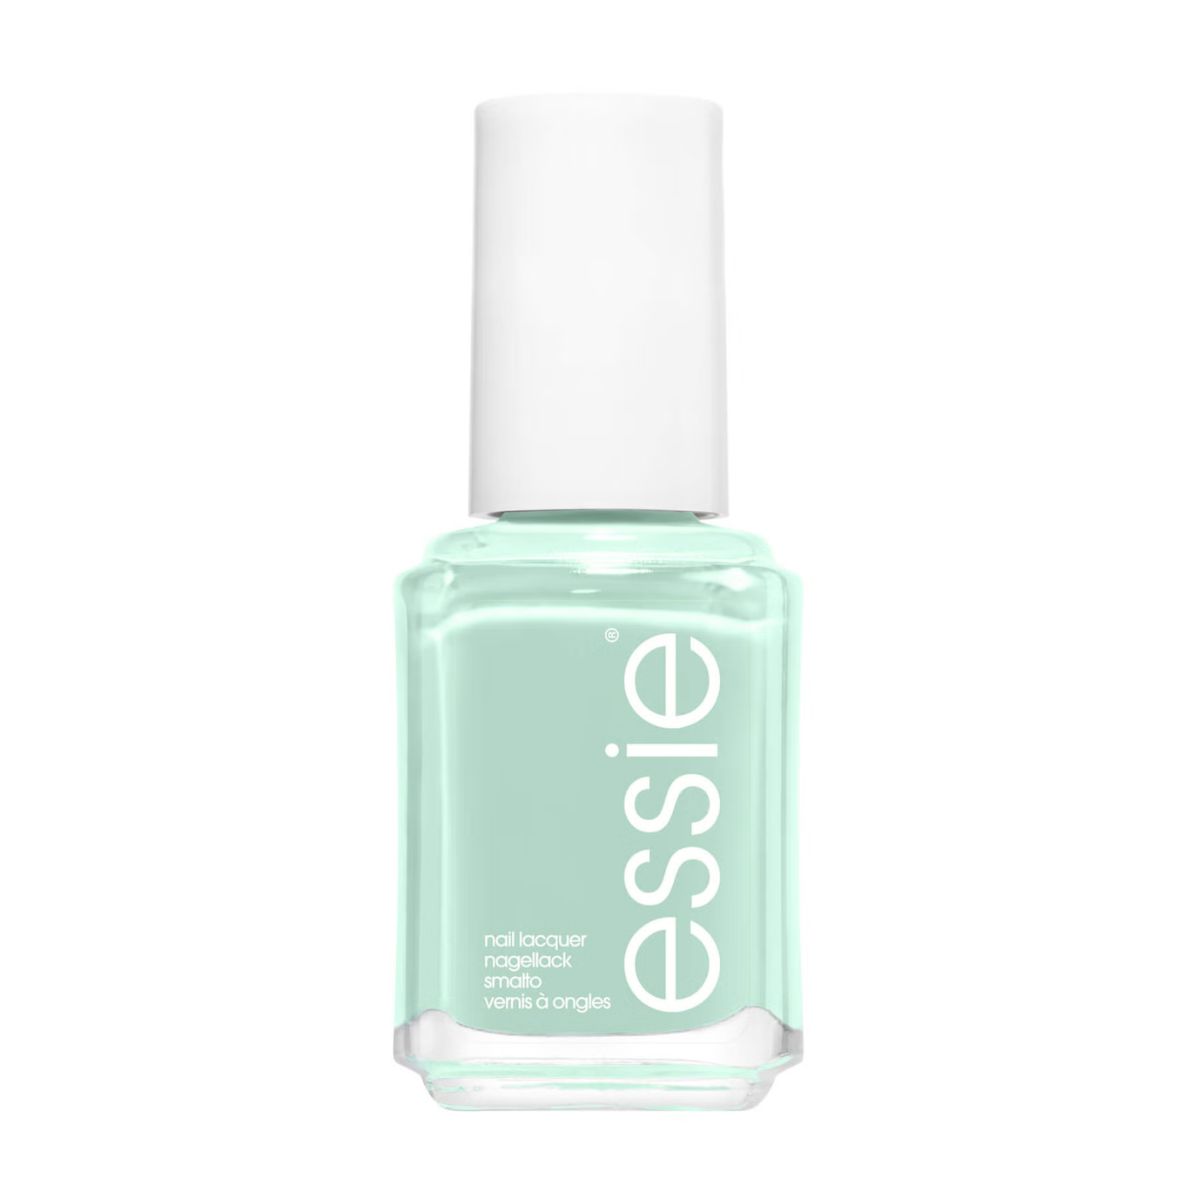 Essie Nail Polish in 99 Mint Candy Apple